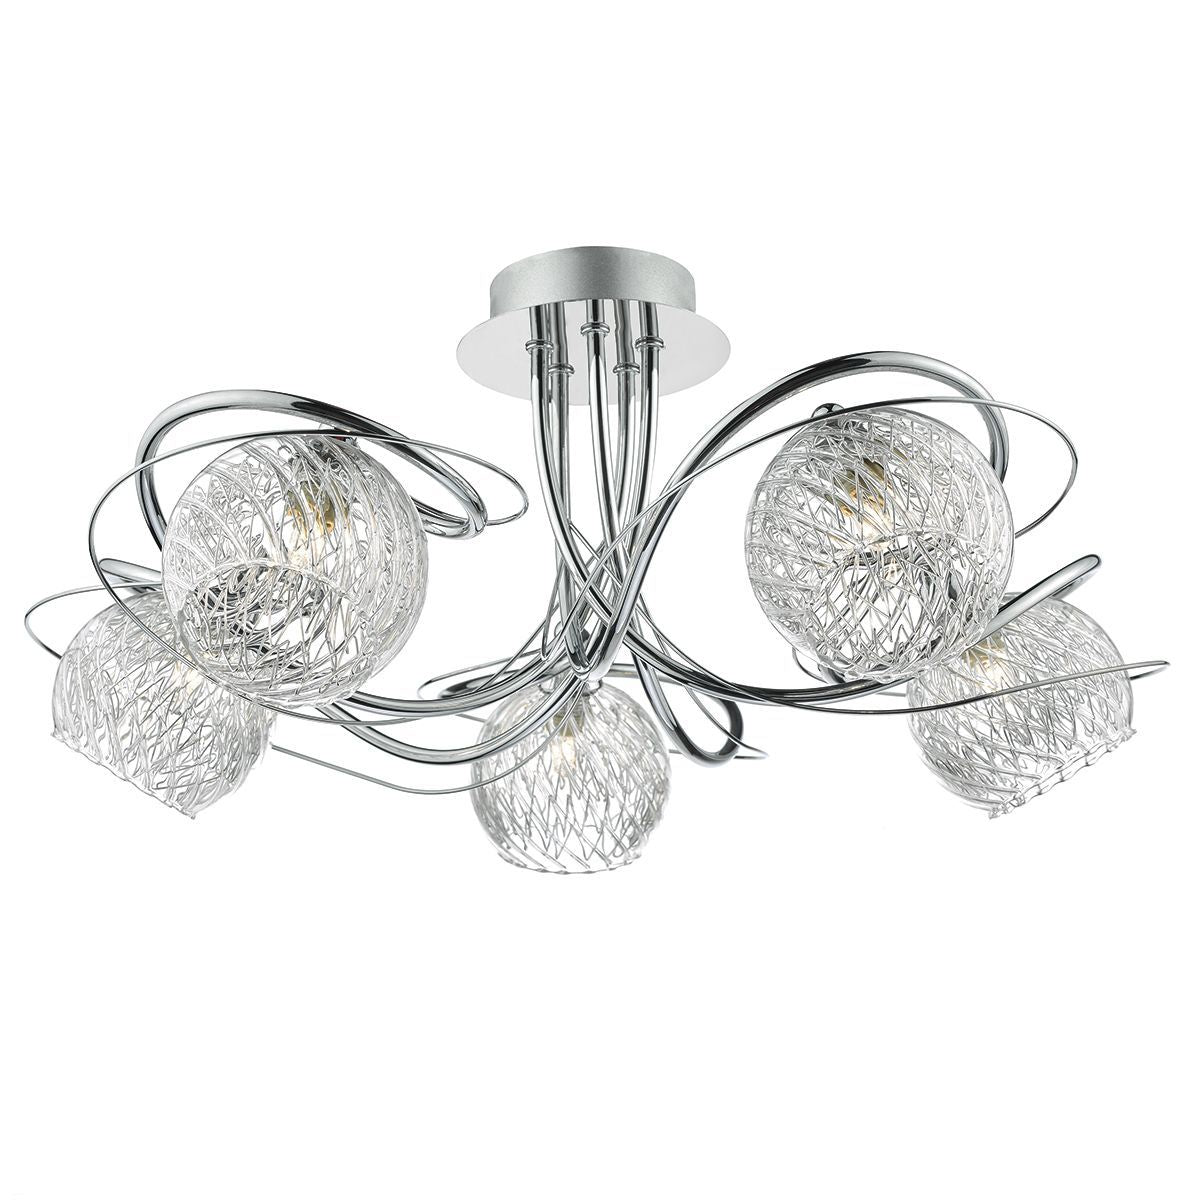 5 Light Semi Flush Ceiling Light With Decorative Wire Effect Glass - ID 8453